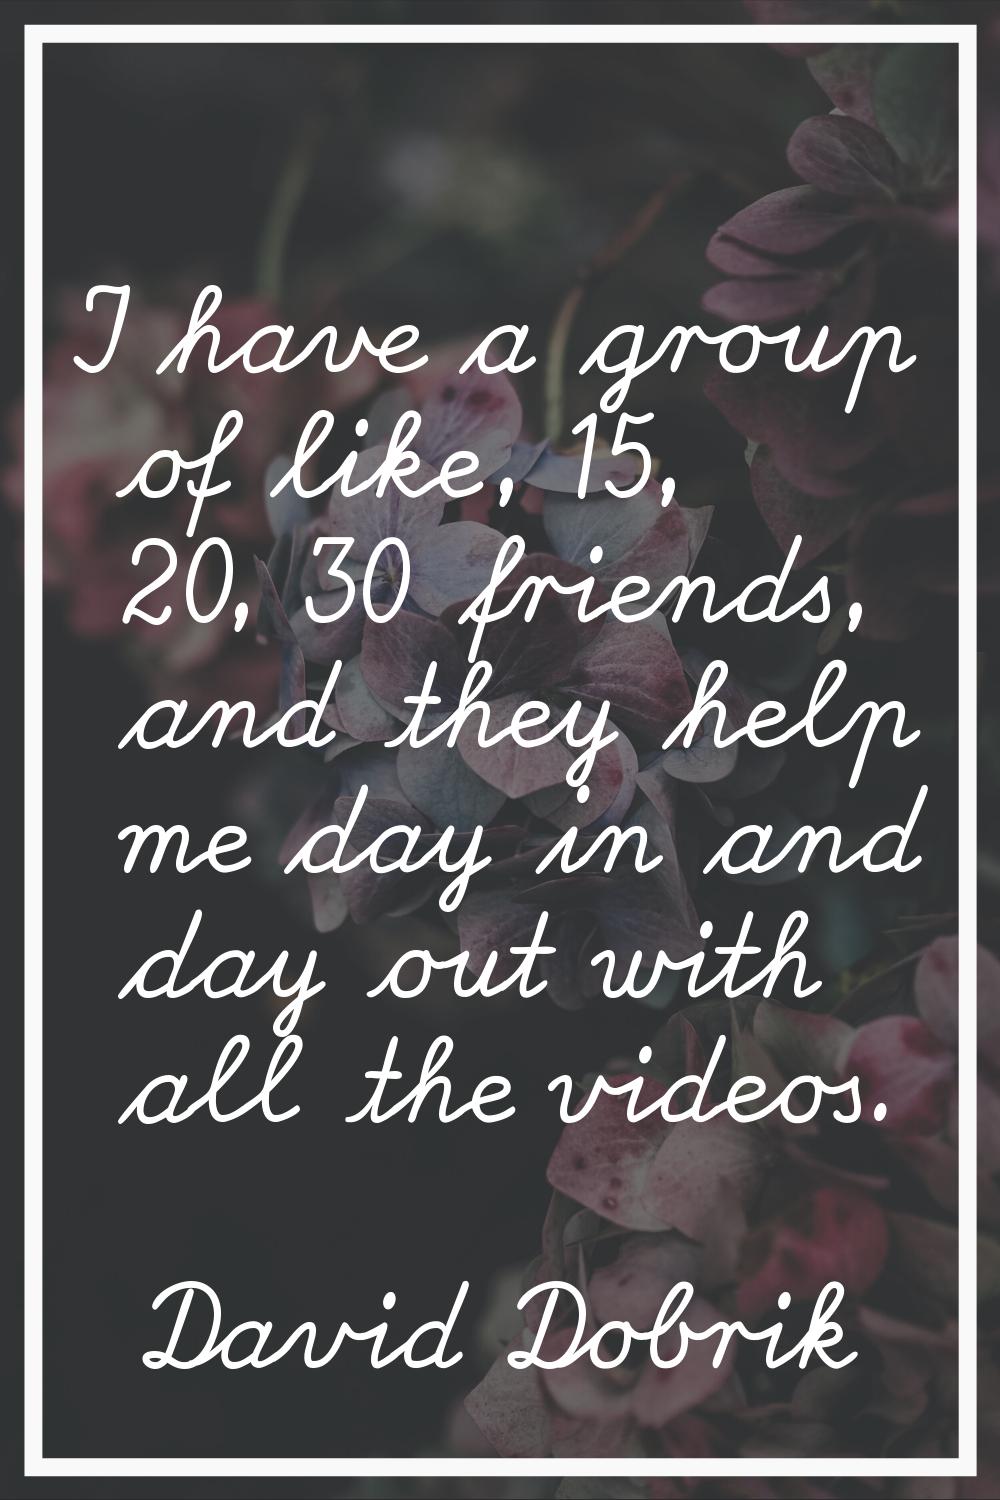 I have a group of like, 15, 20, 30 friends, and they help me day in and day out with all the videos